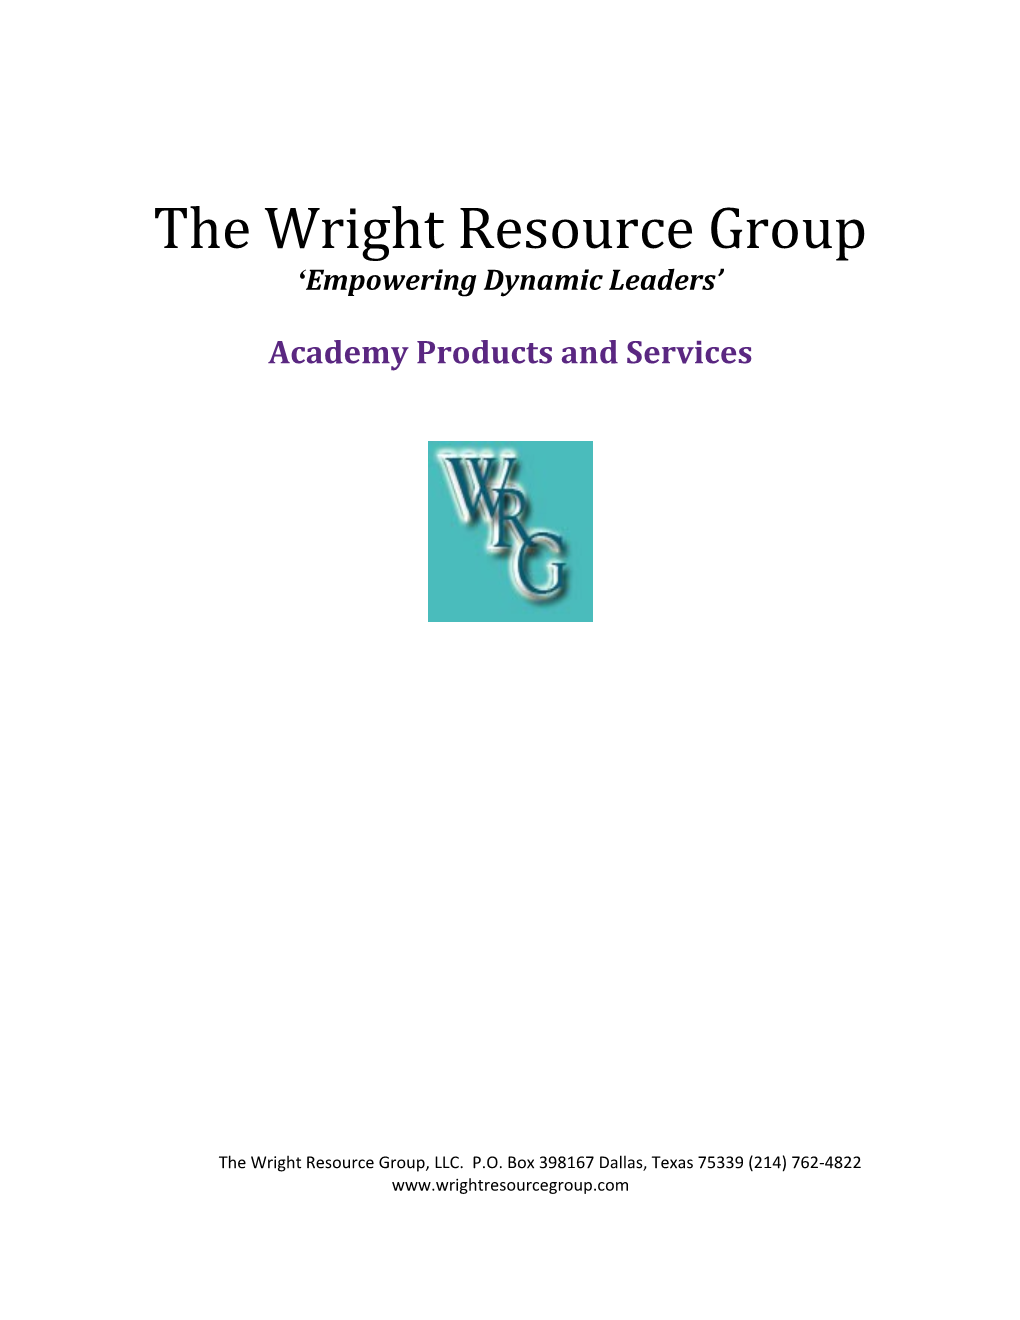 The Wright Resource Group